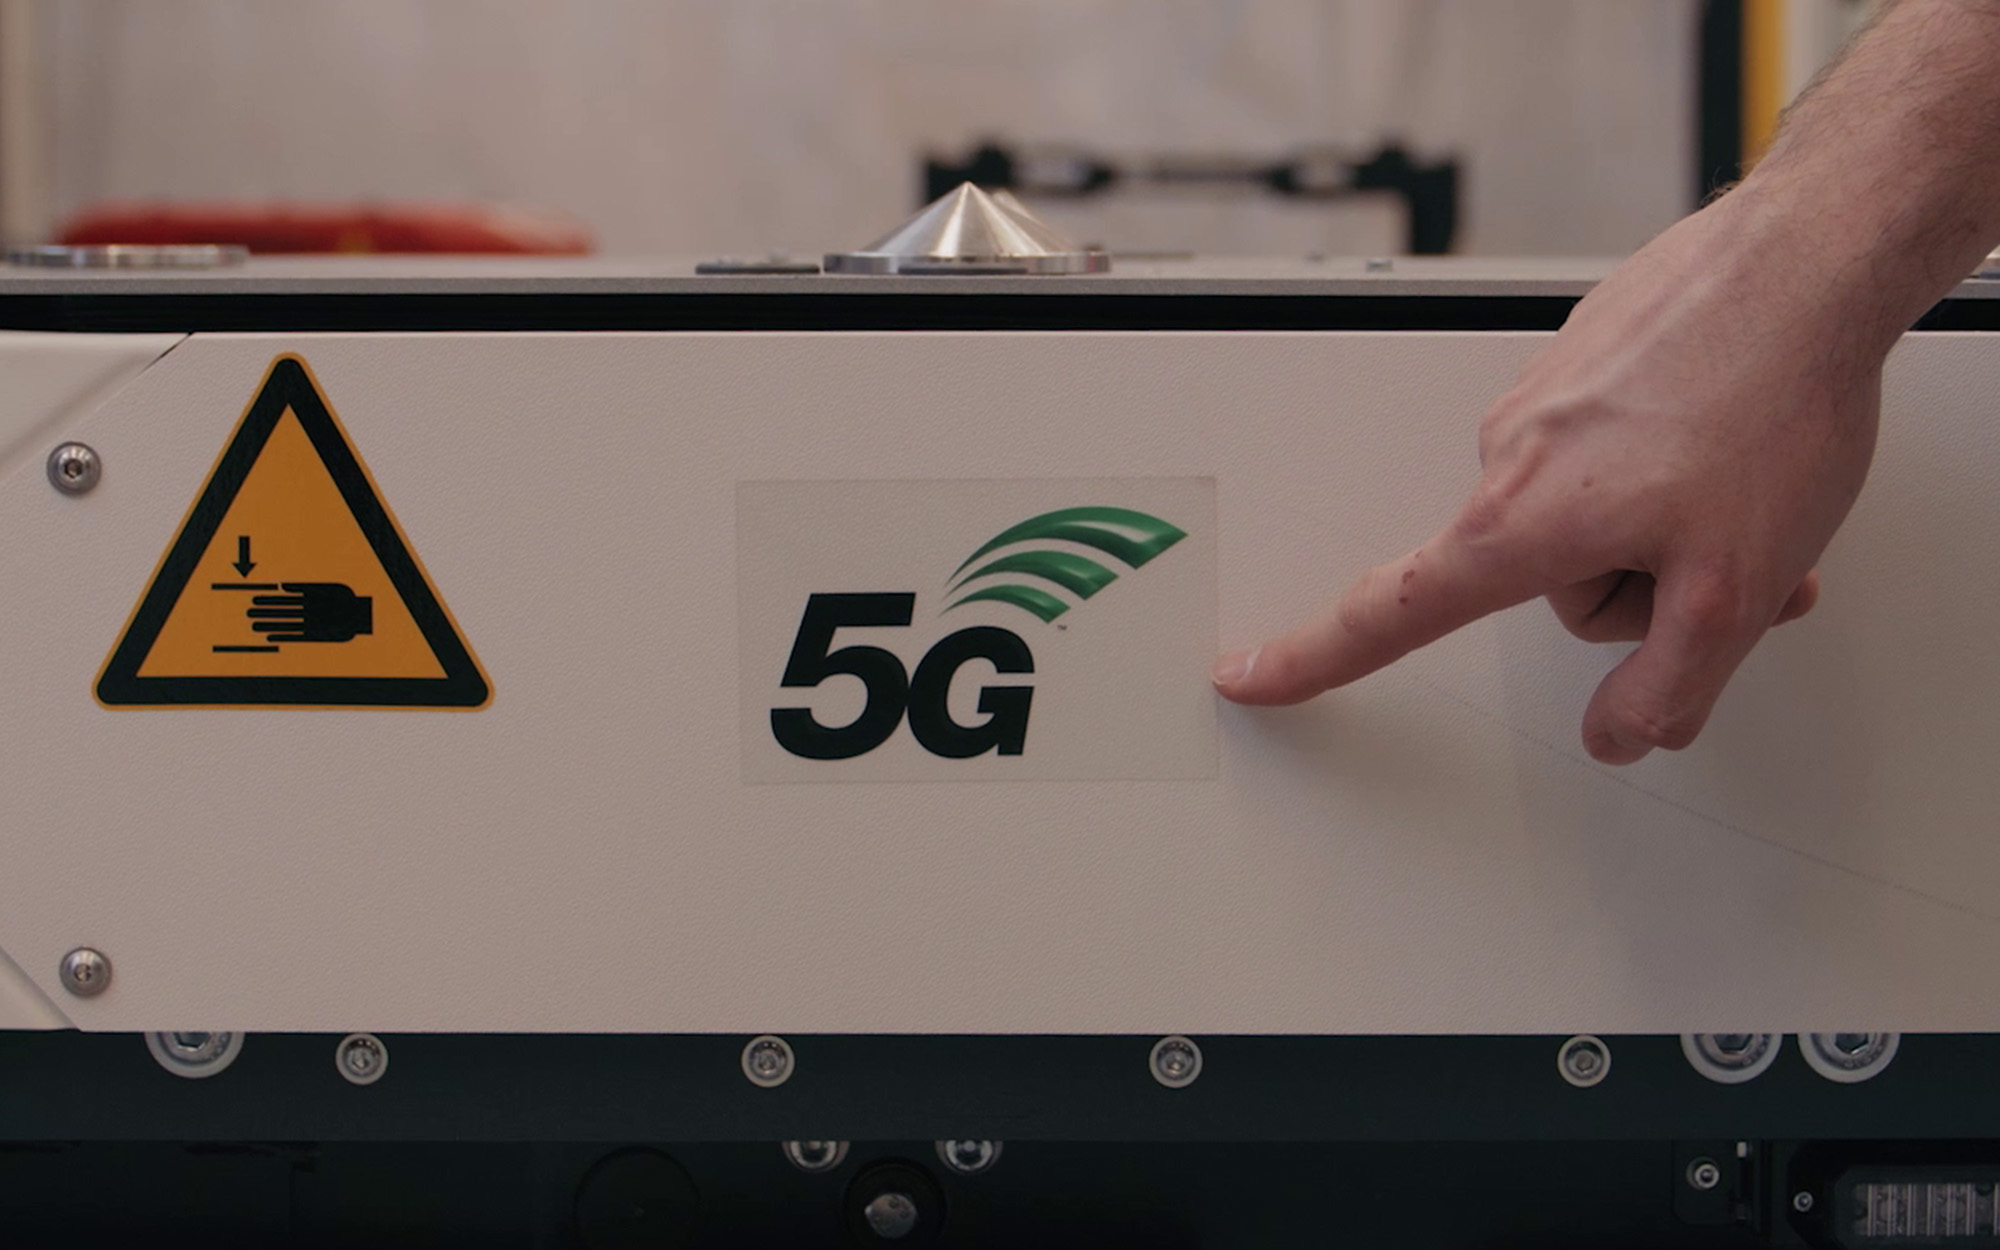 Grenzebach offers 5G in intralogistics